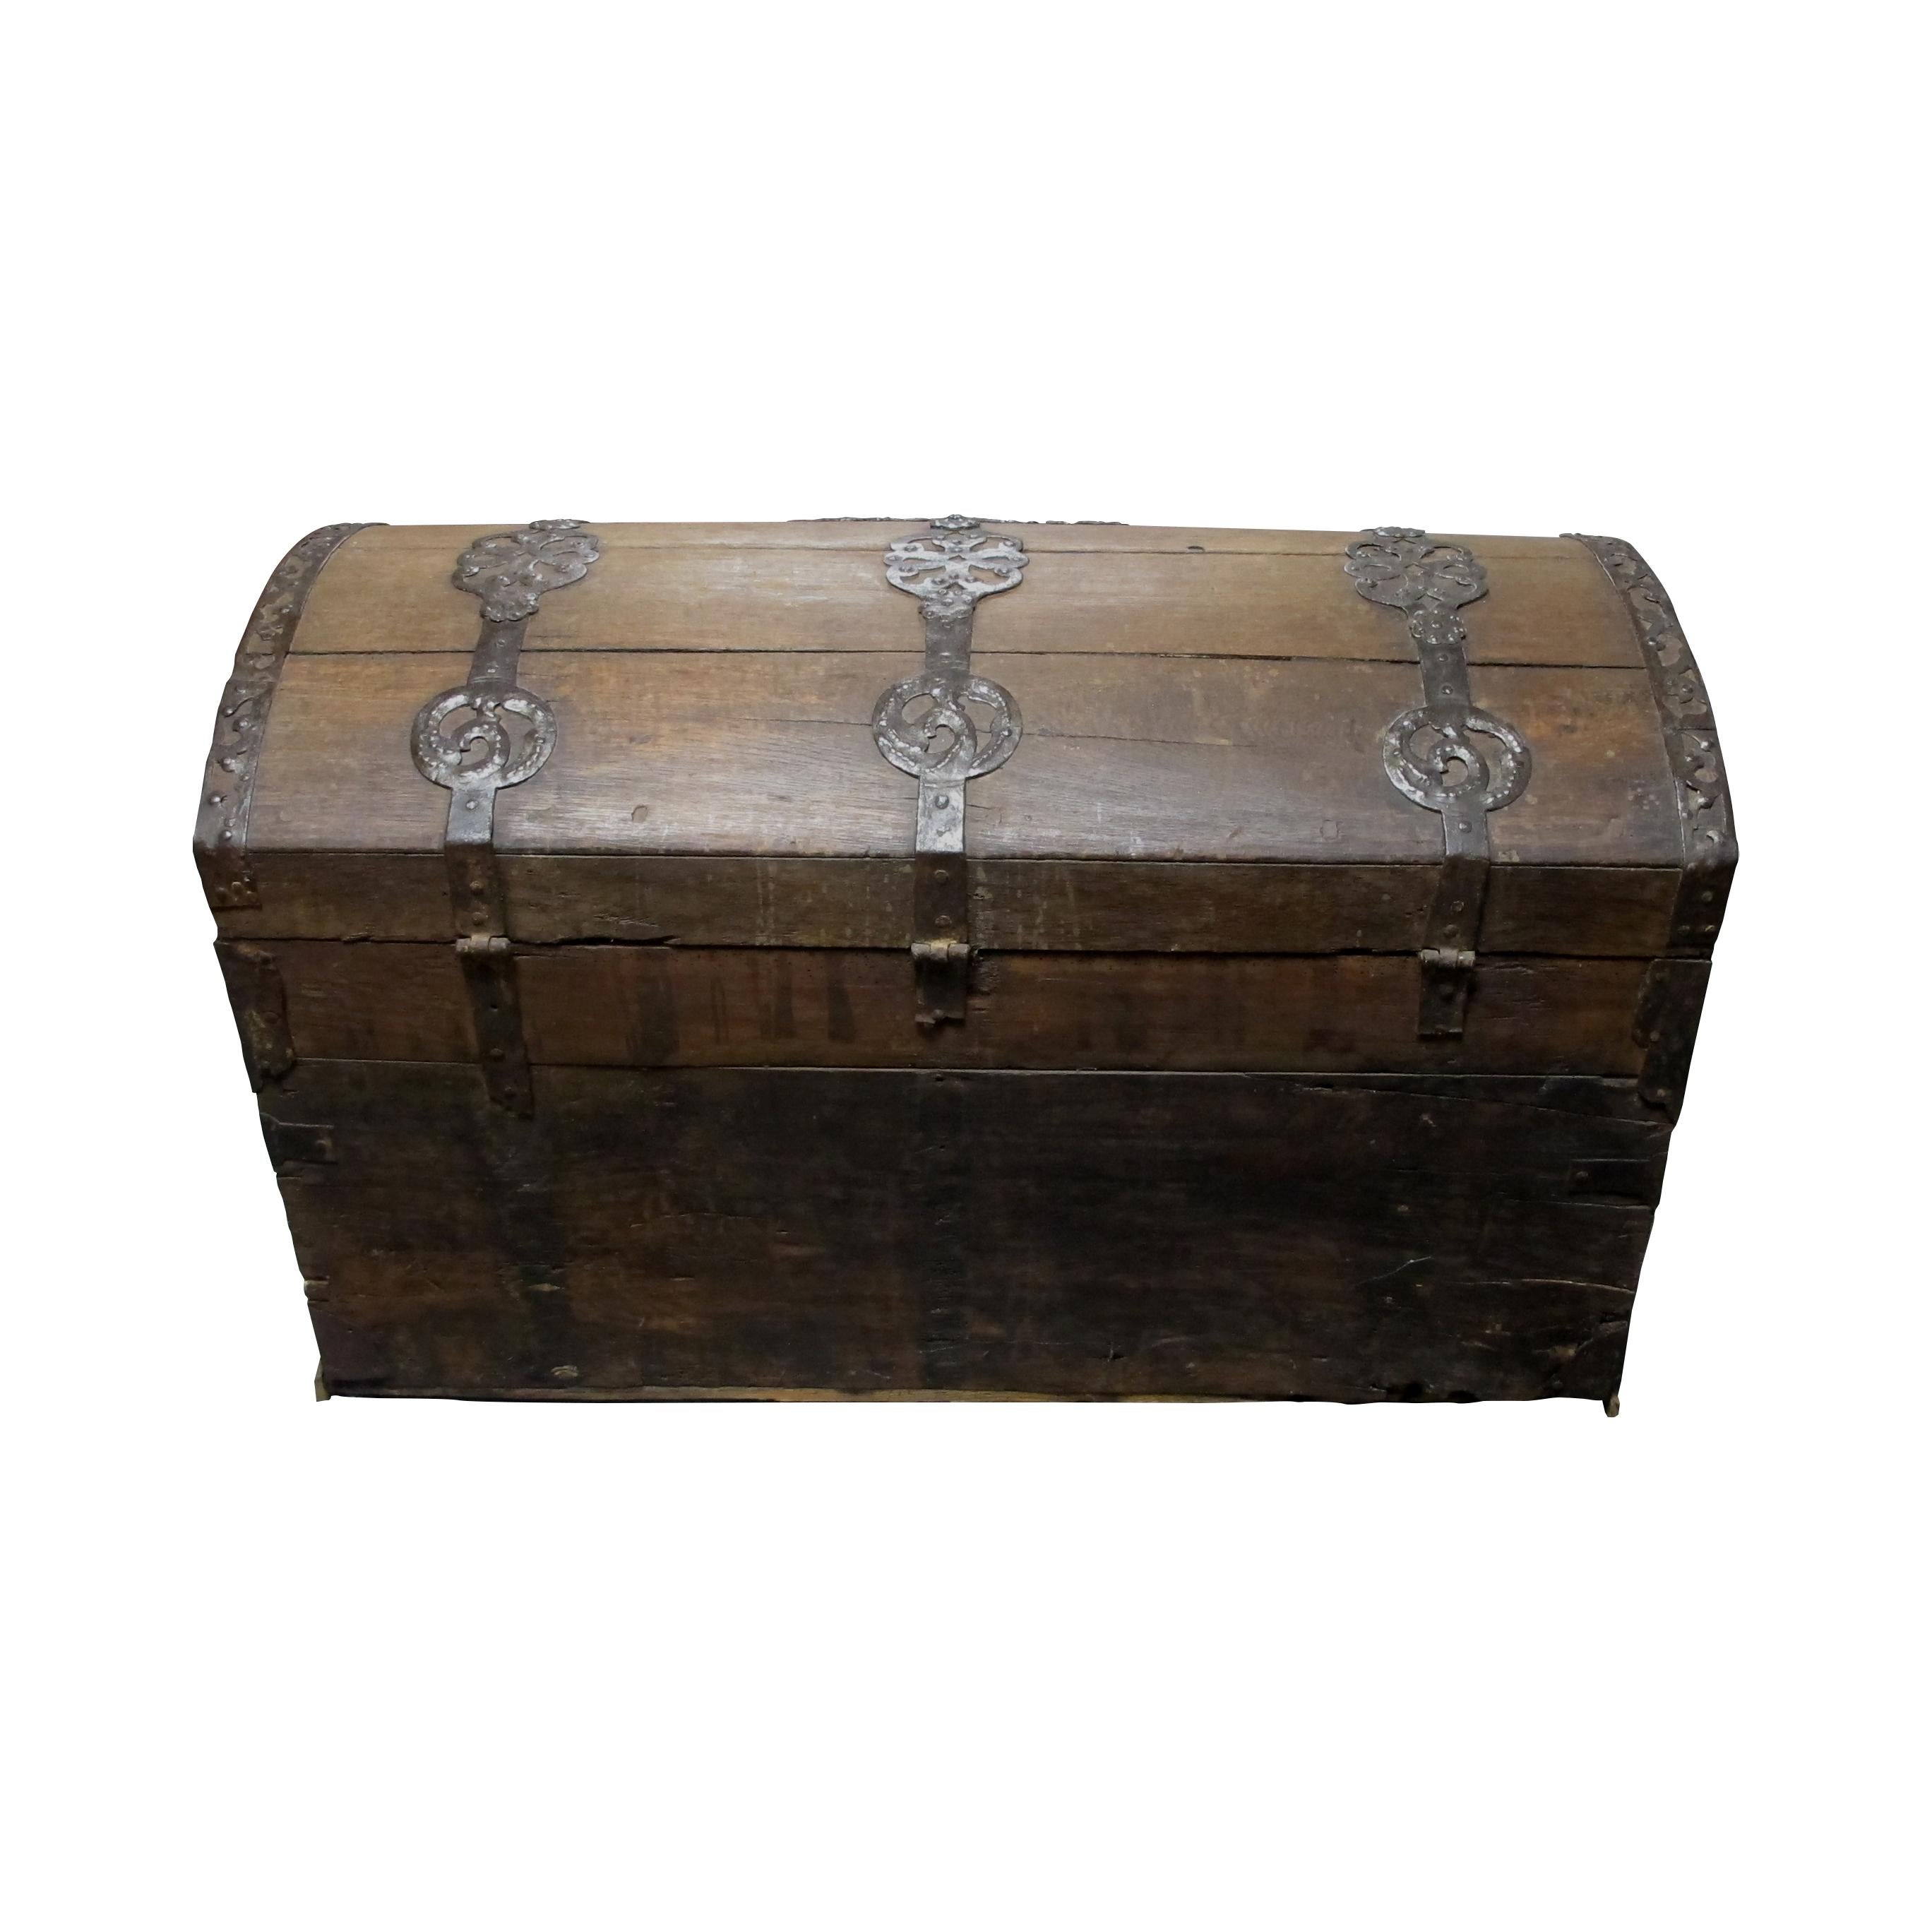 German Antique 18th Century Trunk-Coffer with Dome Top and Ornate Metal Work